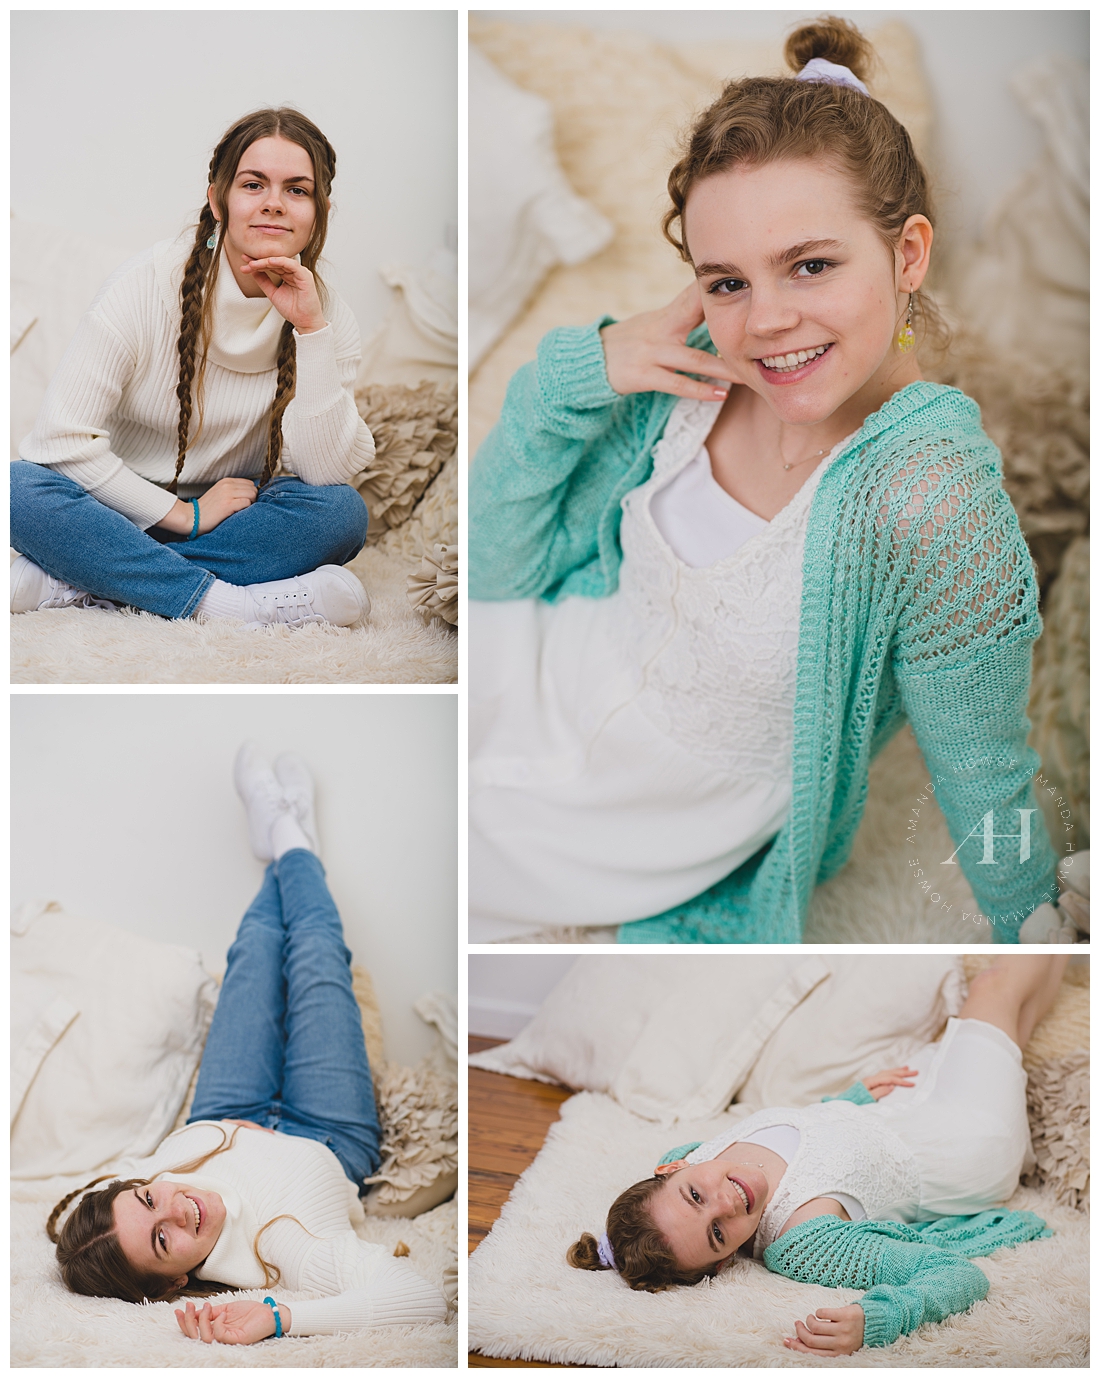 Pastel Outfits for a Dreamy Winter Portrait Session | Fun Day at Studio 253 with the AHP Model Team | | Photographed by the Best Tacoma Senior Photographer Amanda Howse 